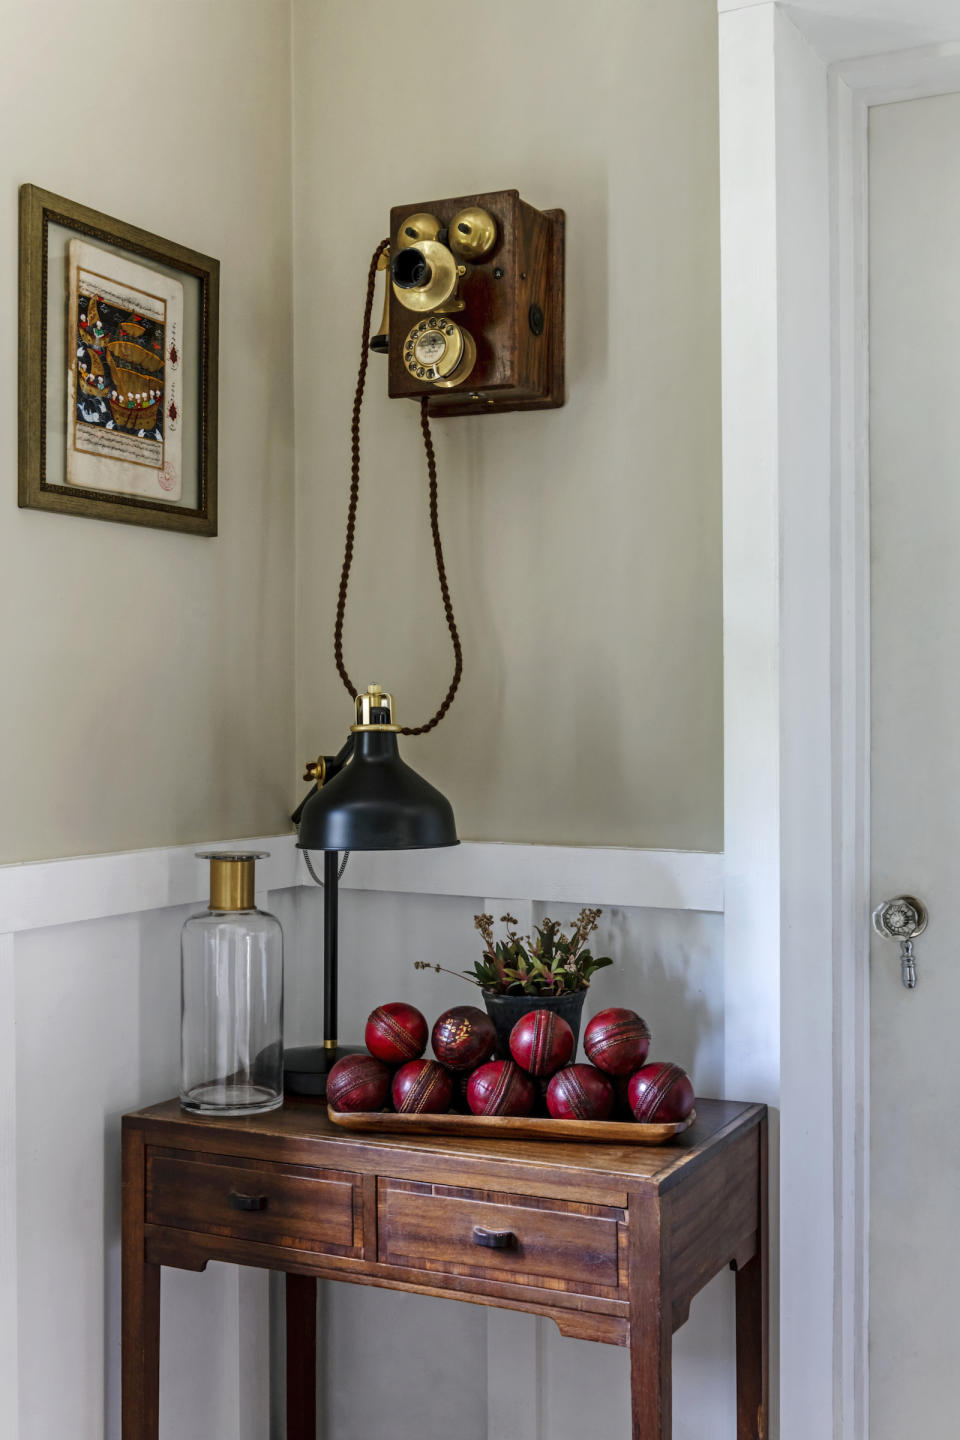 16. INCORPORATE VINTAGE DETAILS AND QUIRKY DISPLAYS